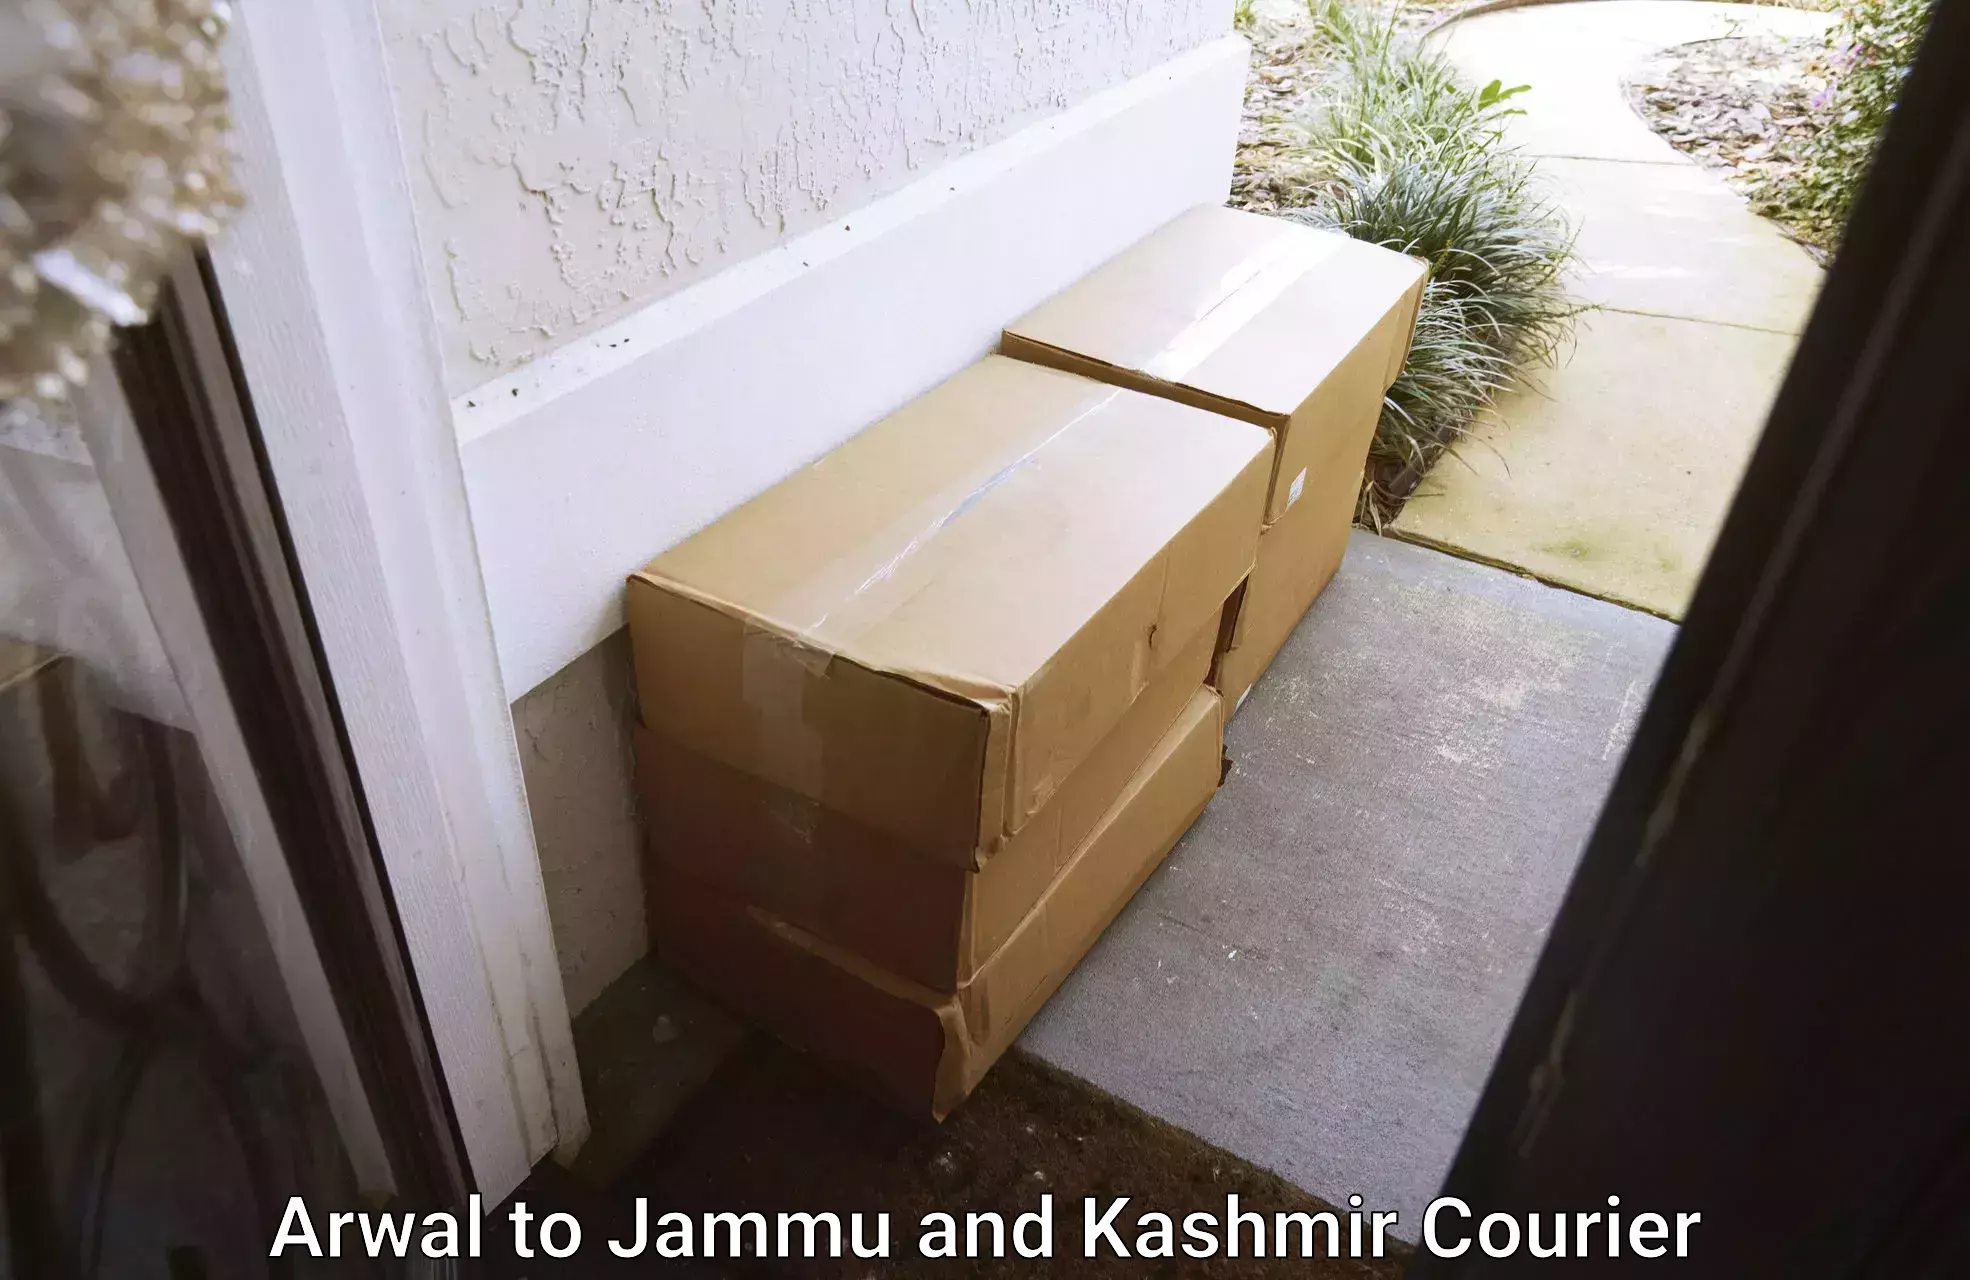 Dependable household movers Arwal to Jammu and Kashmir